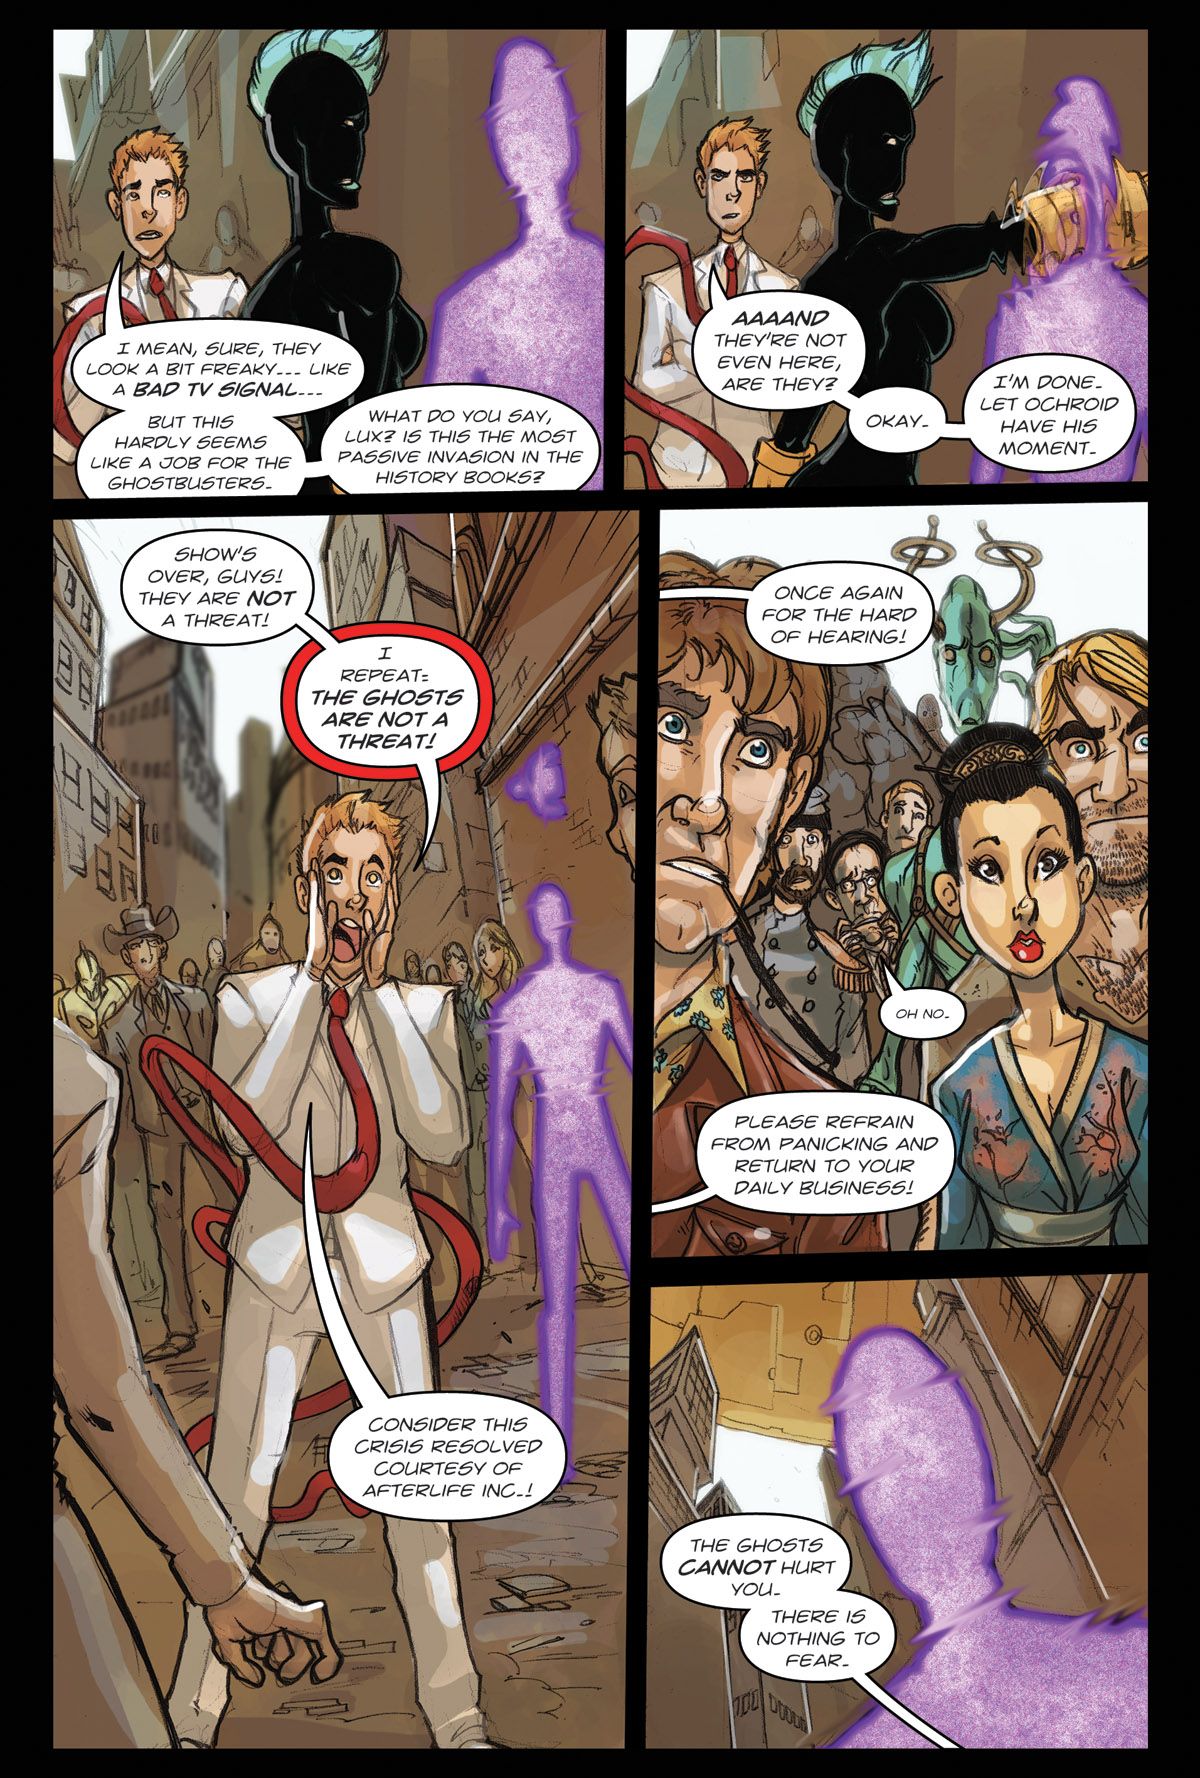 Afterlife Inc. | Near Life | Page 3